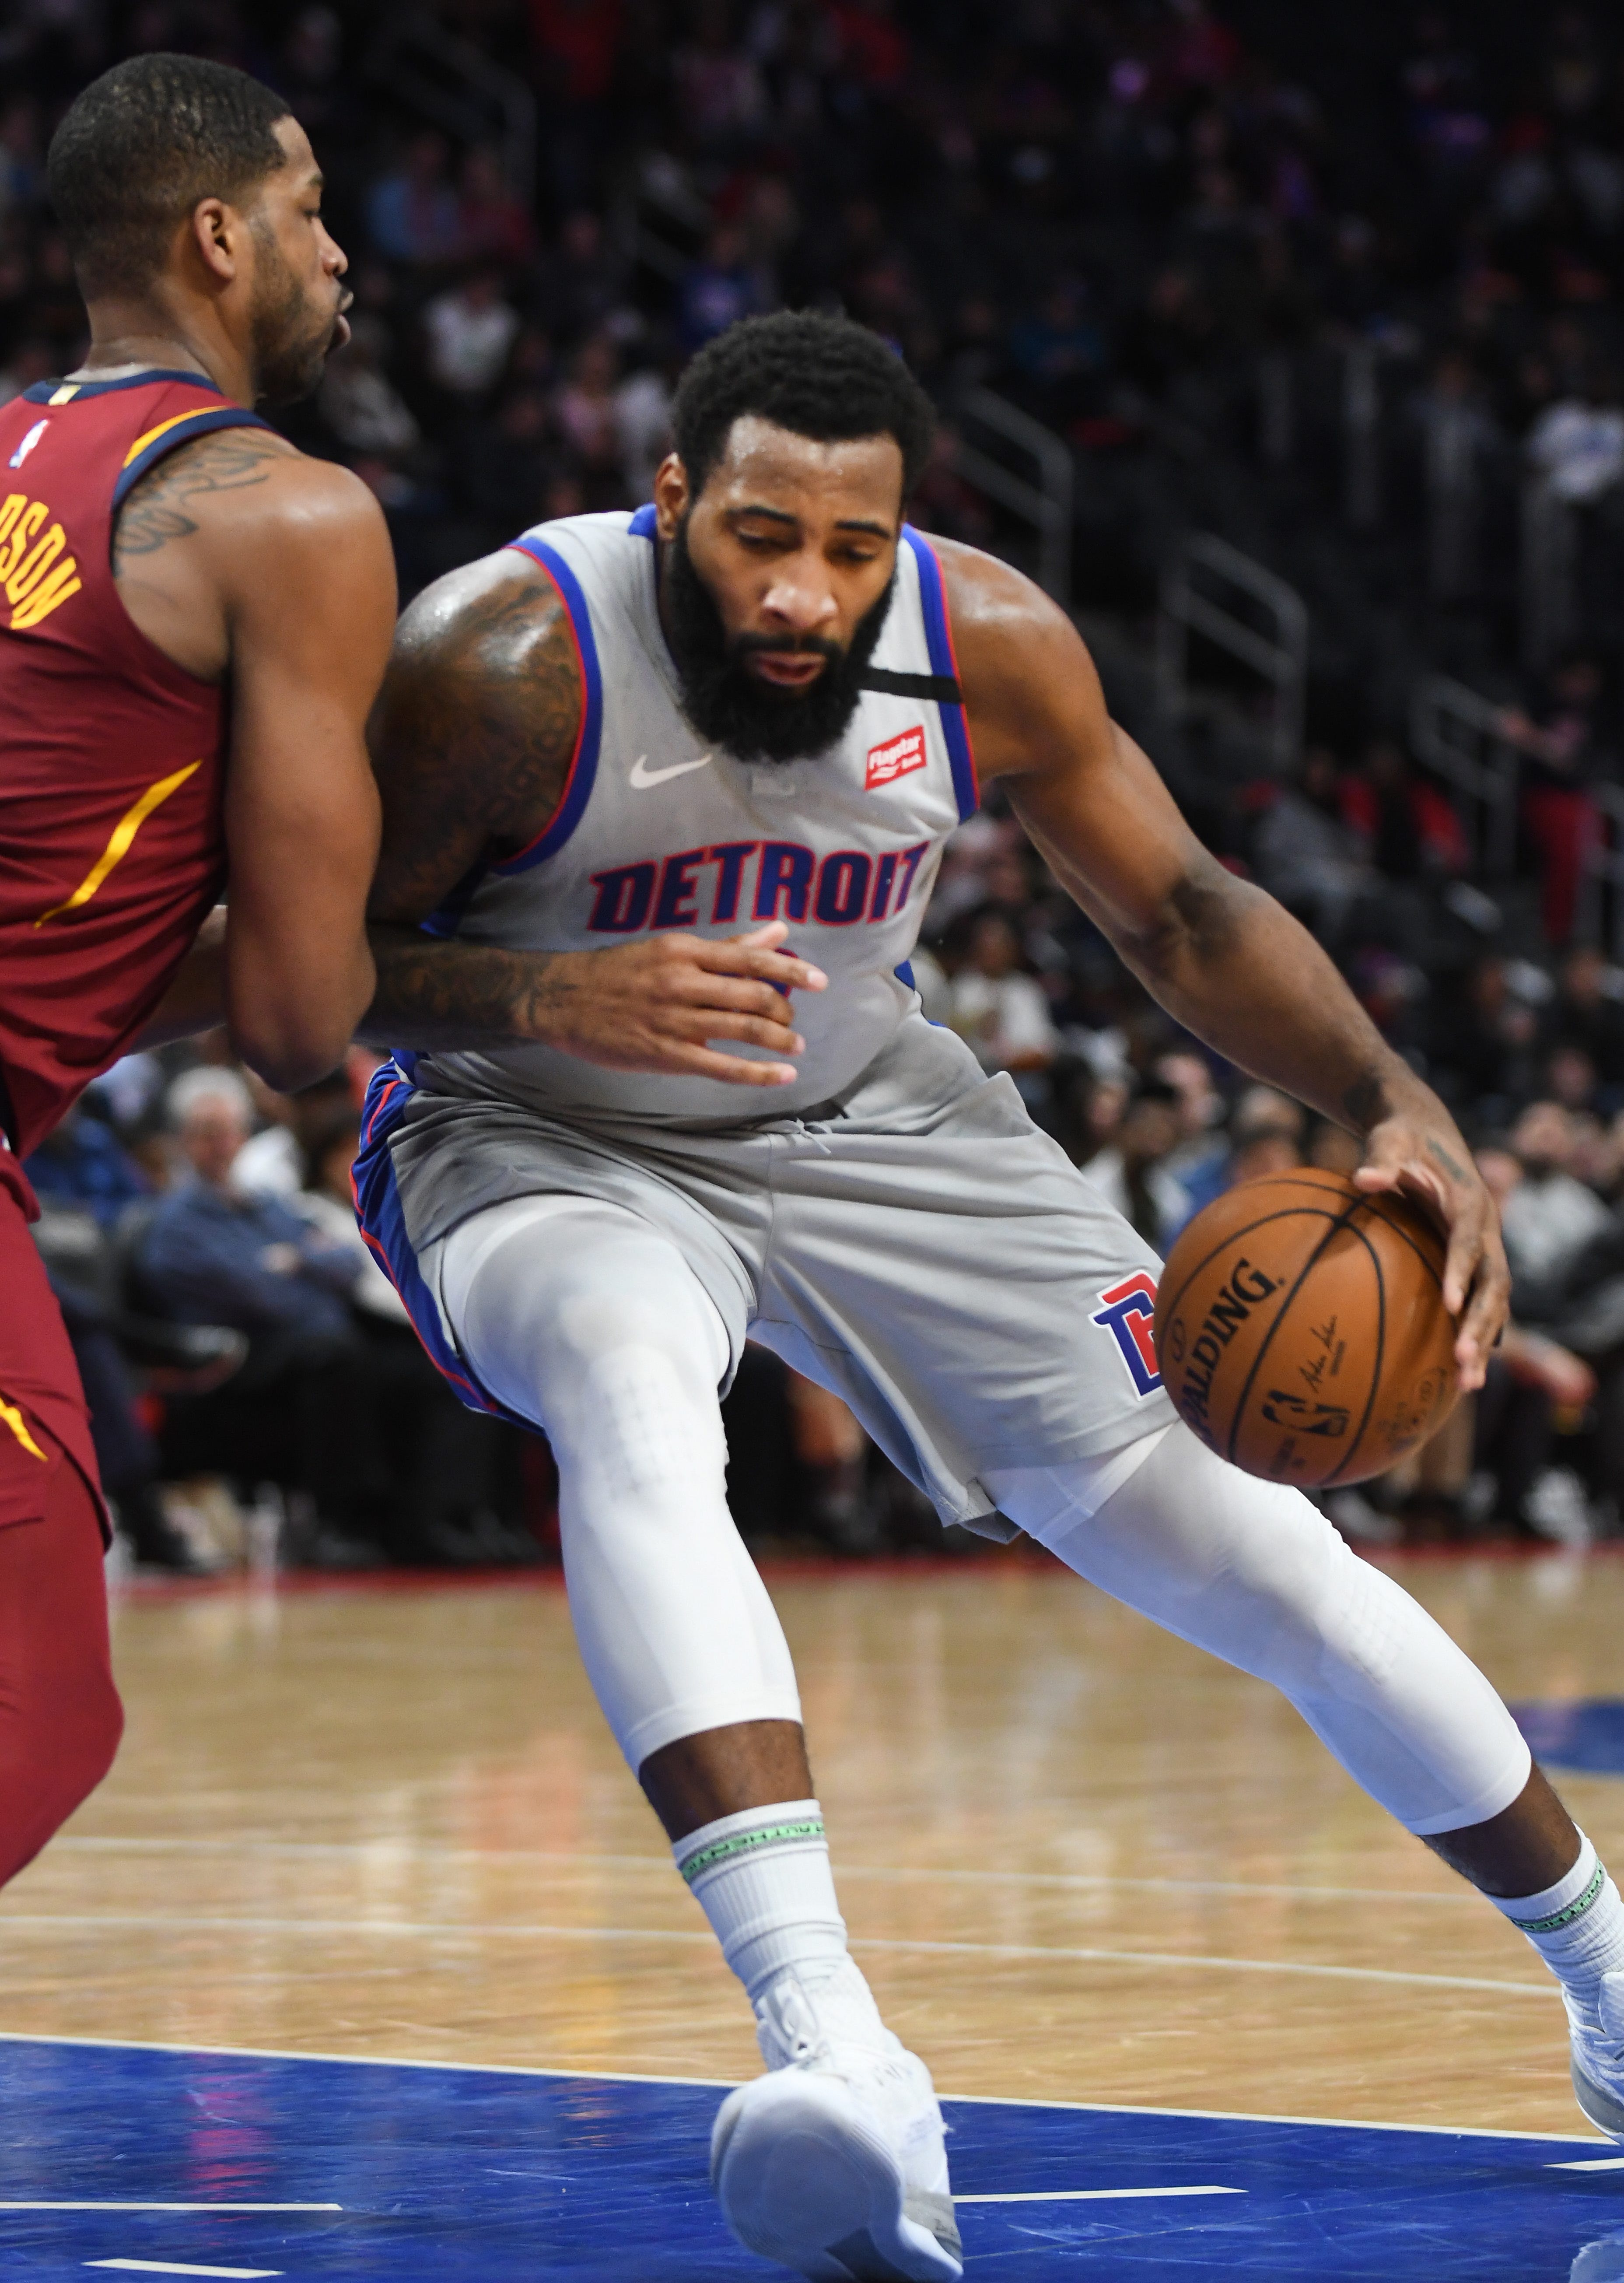 Pistons' Andre Drummond works against Cavaliers' Tristan Thompson in the second quarter.